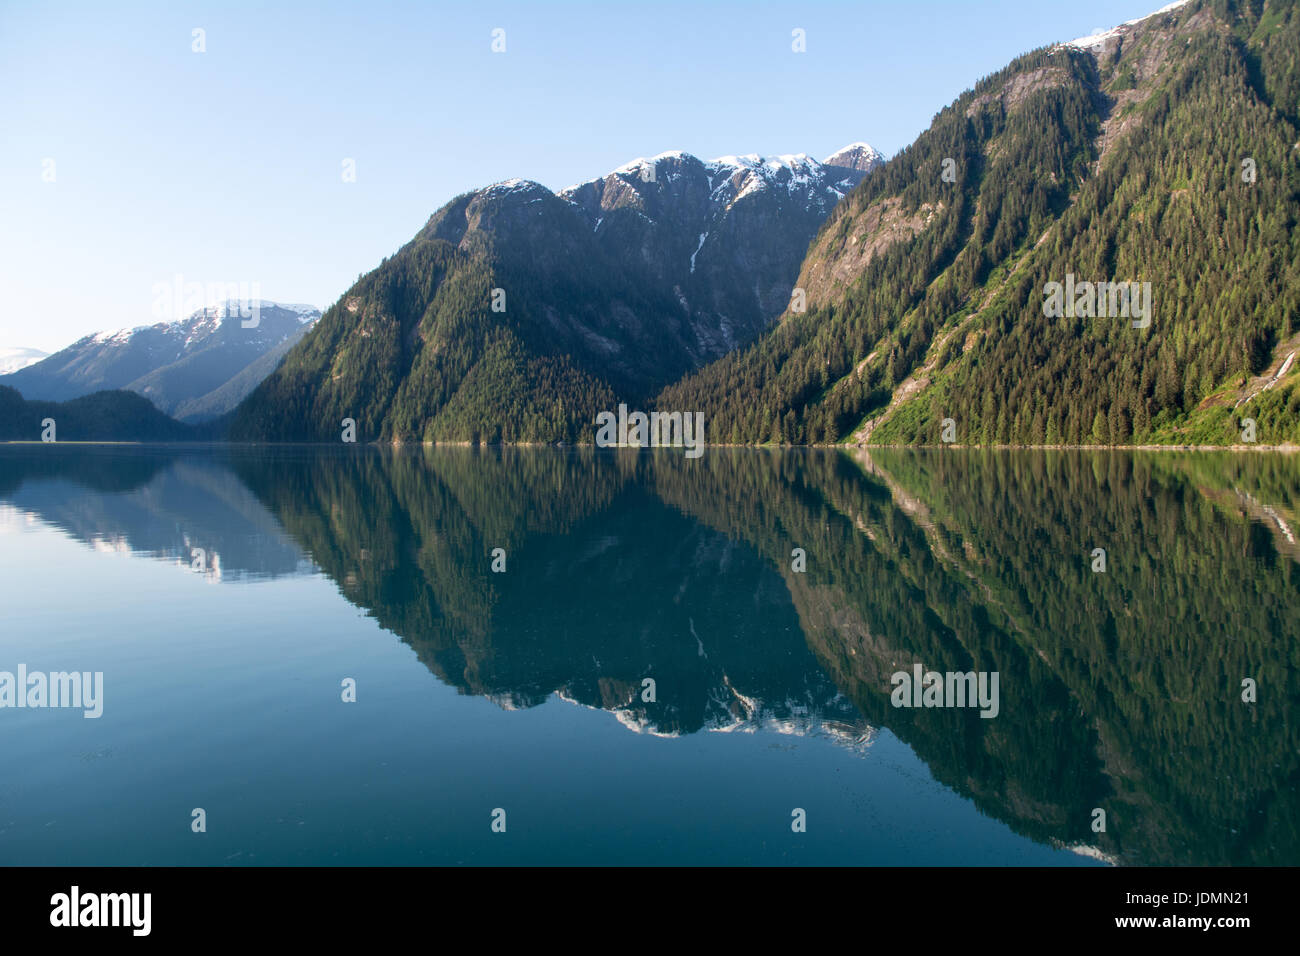 Mountain fjords reflected in the still coastal waters of the Kitlope region of the Great Bear Rainforest, British Columbia, Canada. Stock Photo